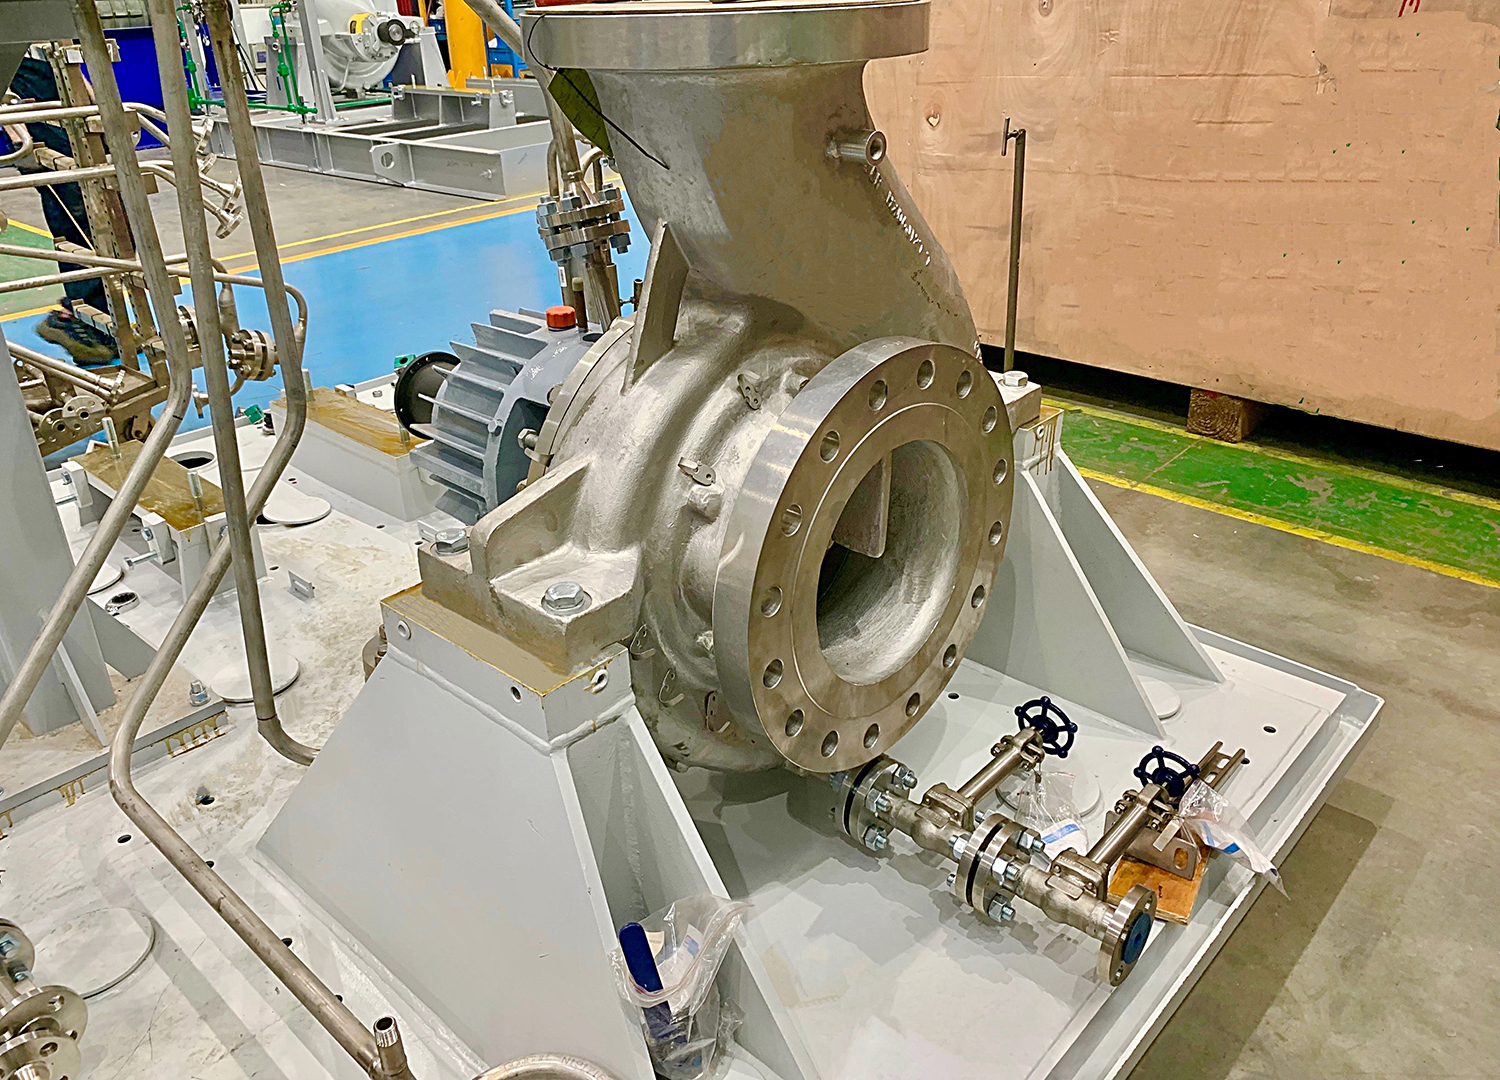 Design and manufacturing of the 87 pumps is taking place at Sulzer’s facility in Suzhou.